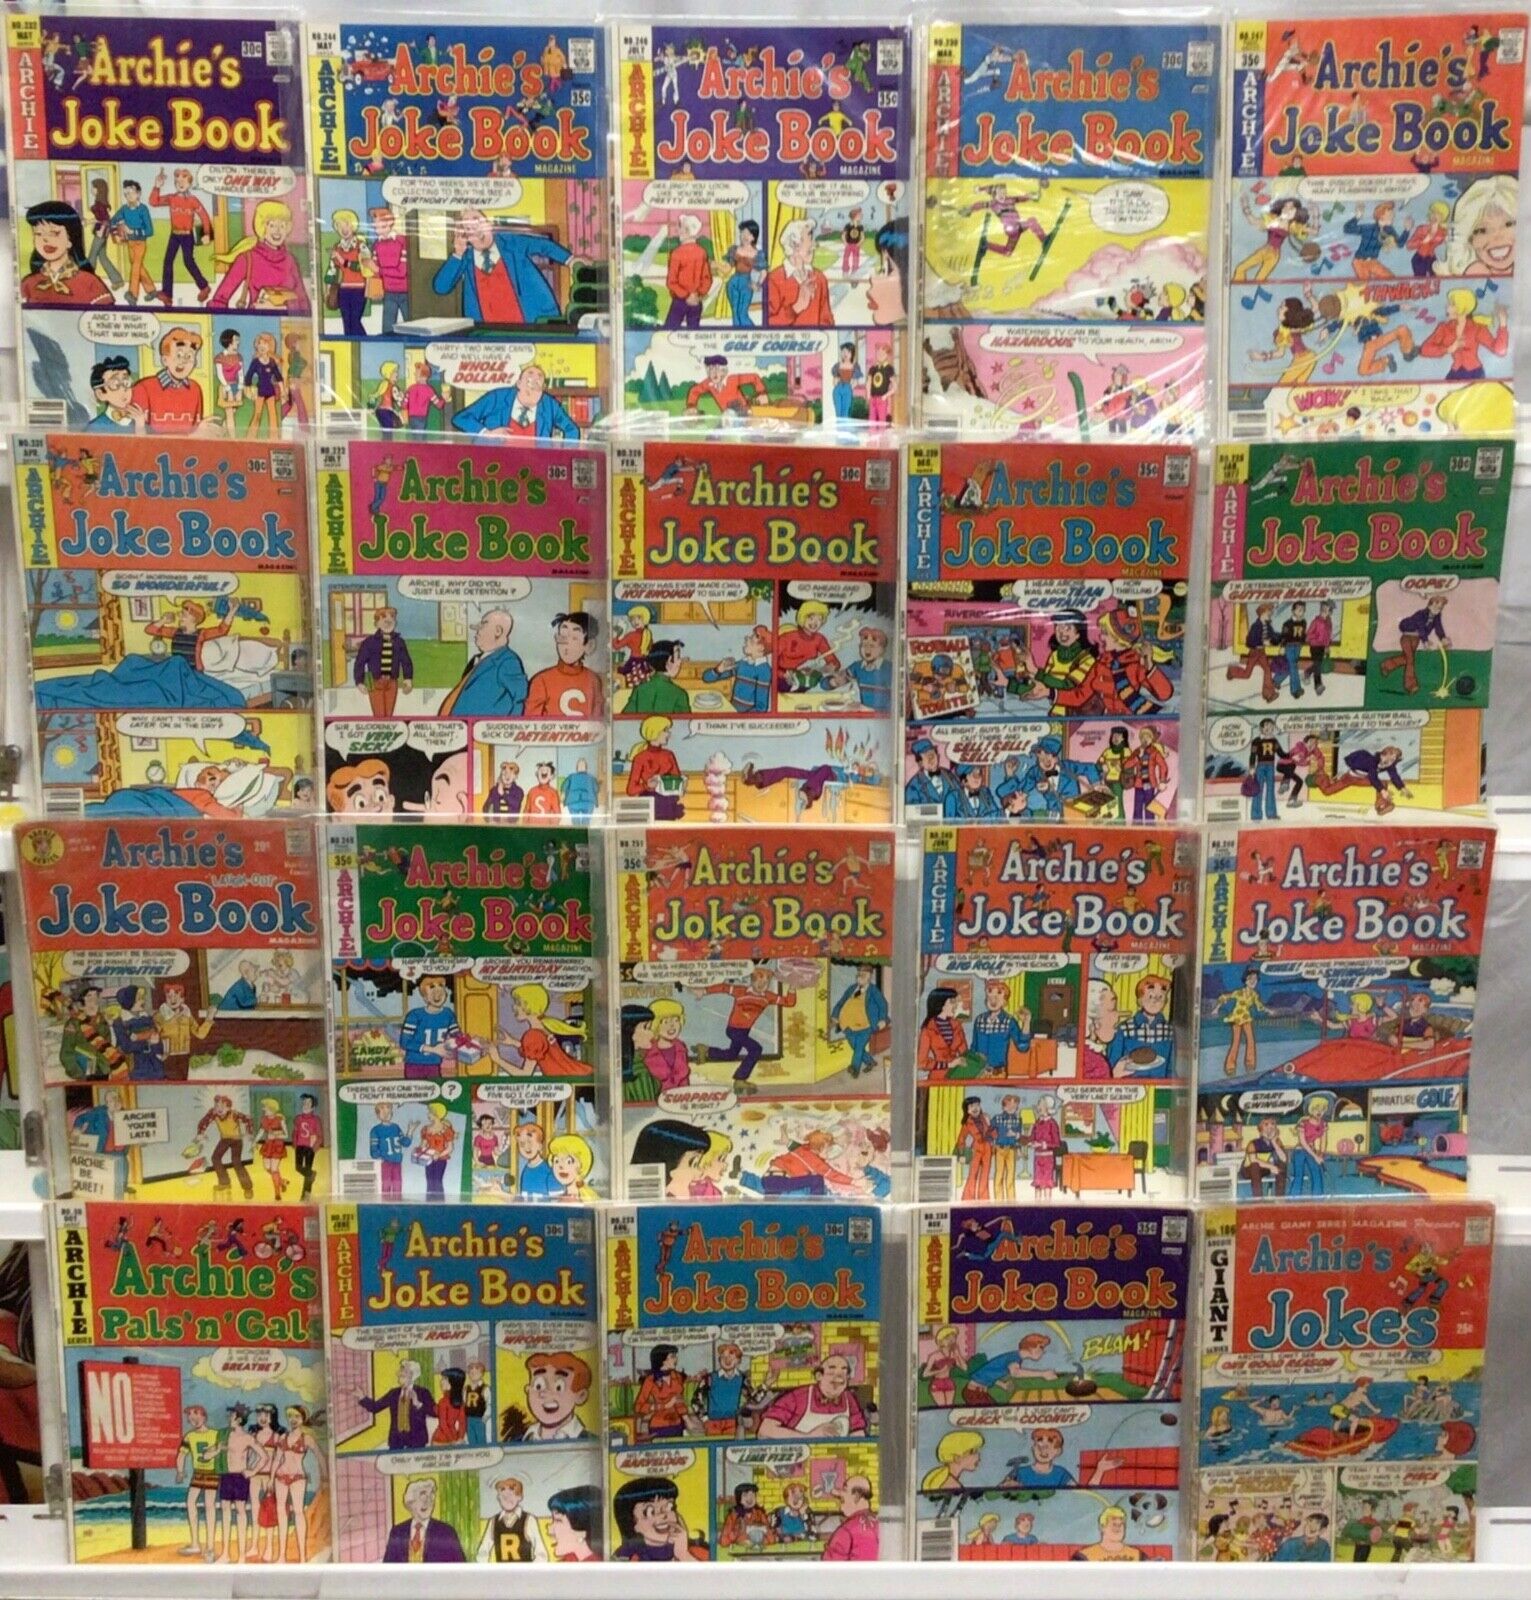 Archie Comics Archie’s Joke Book Comic Book Lot of 20 Issues